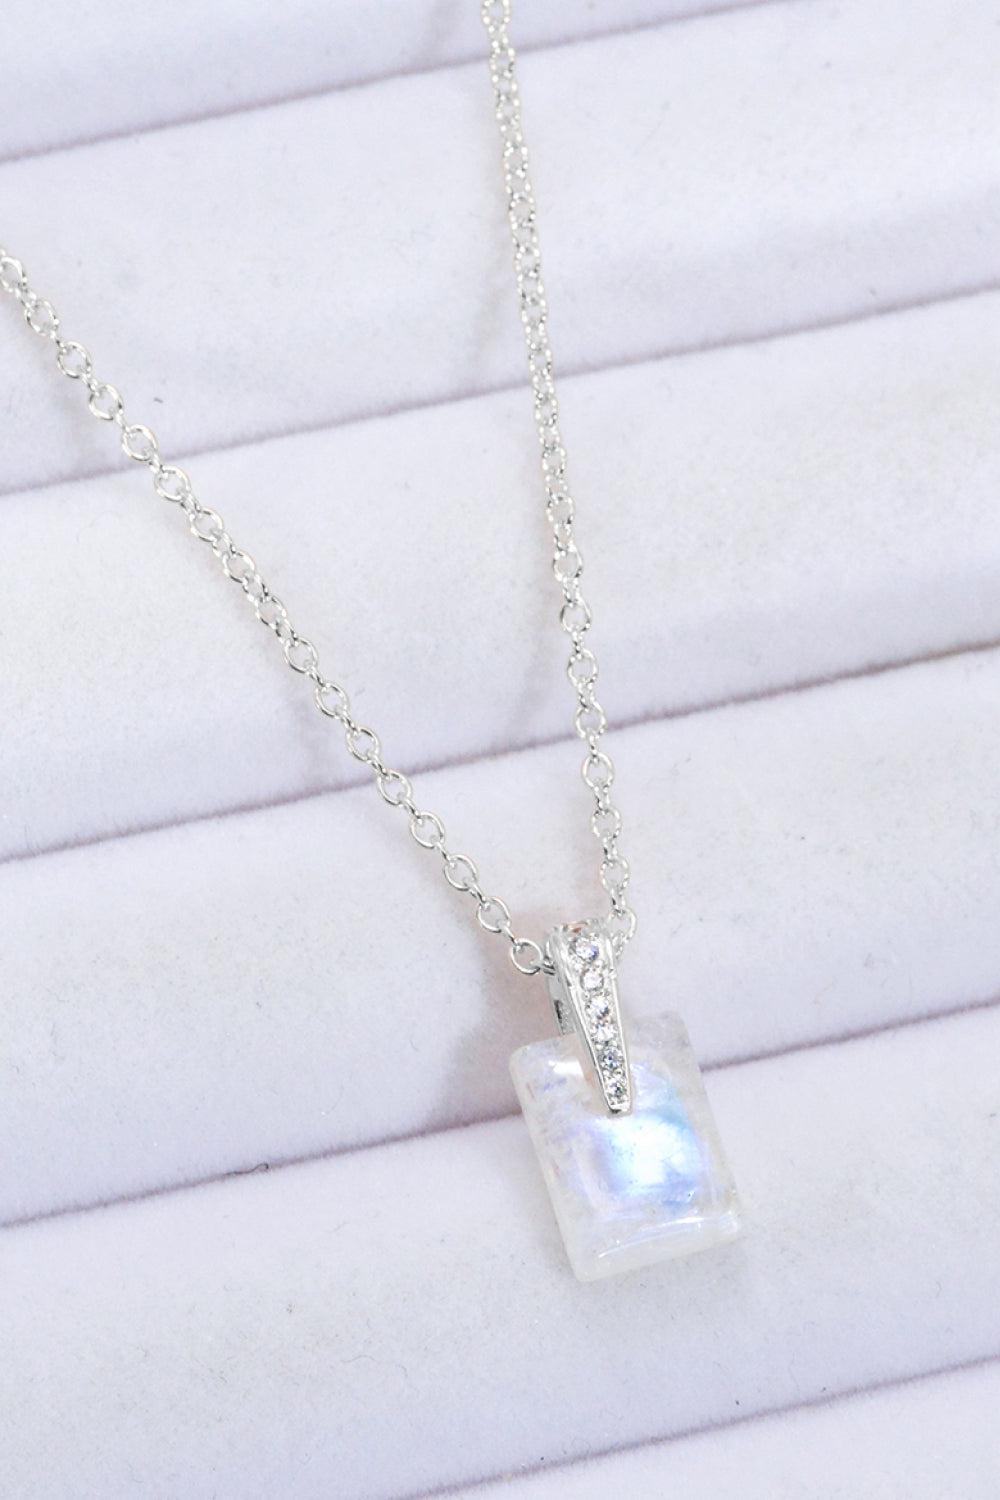 925 Sterling Silver Natural Moonstone Pendant Necklace BLUE ZONE PLANET